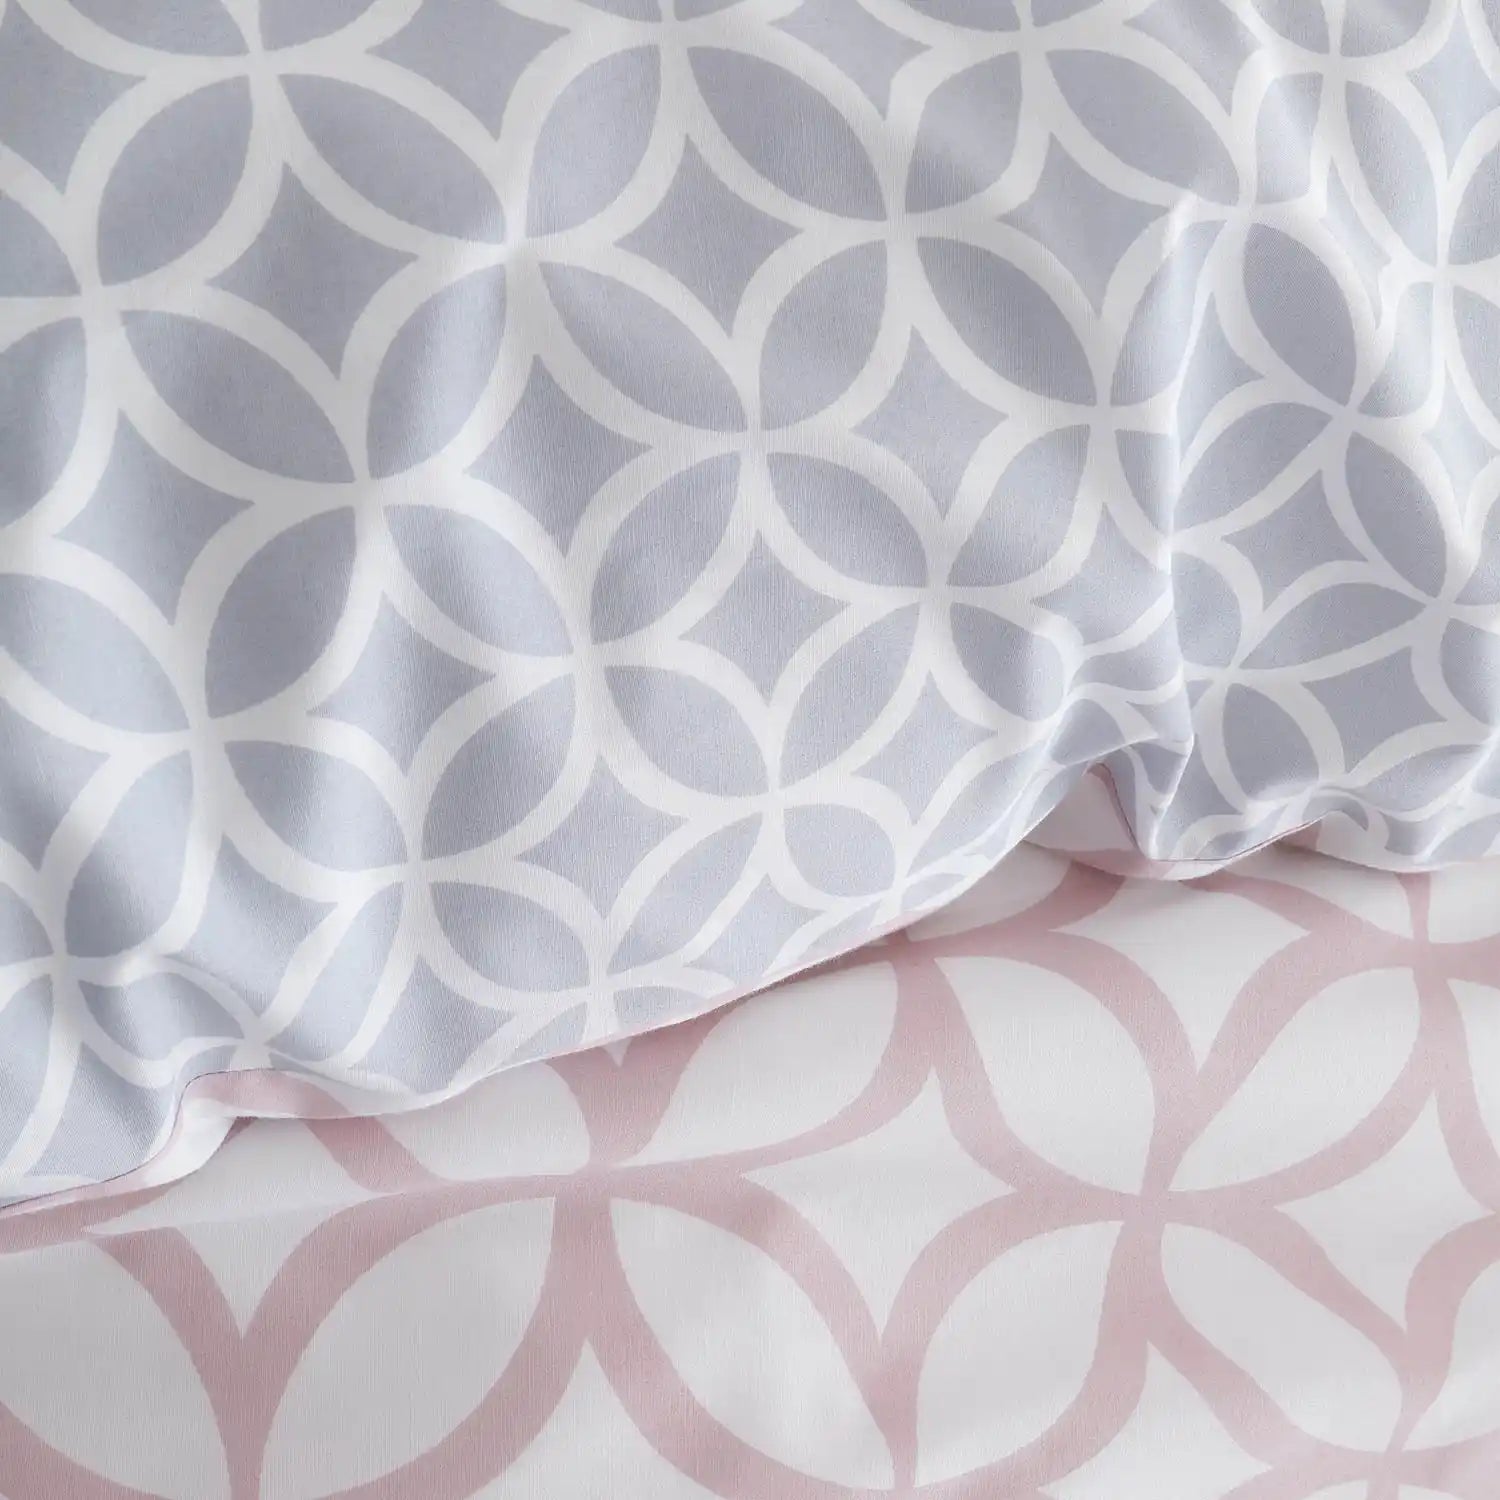  Catherine Lansfield Geo Trellis Duvet Cover Set with Pillowcases - Pink 4 Shaws Department Stores